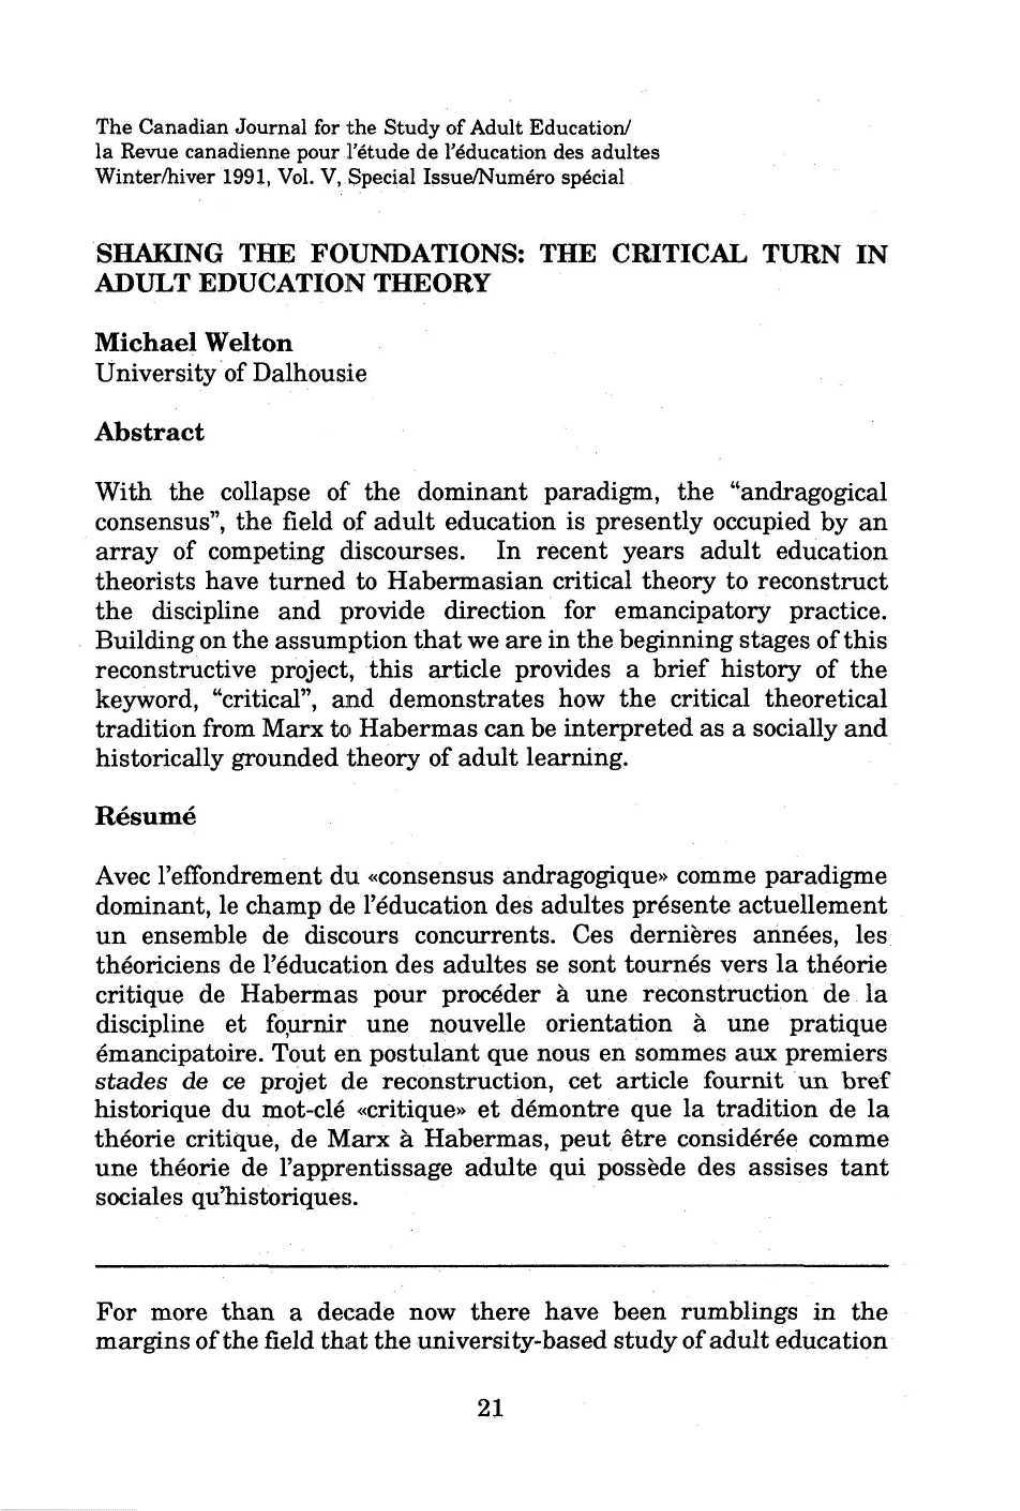 Shaking the Foundations: the Critical Turn in Adult Education Theory